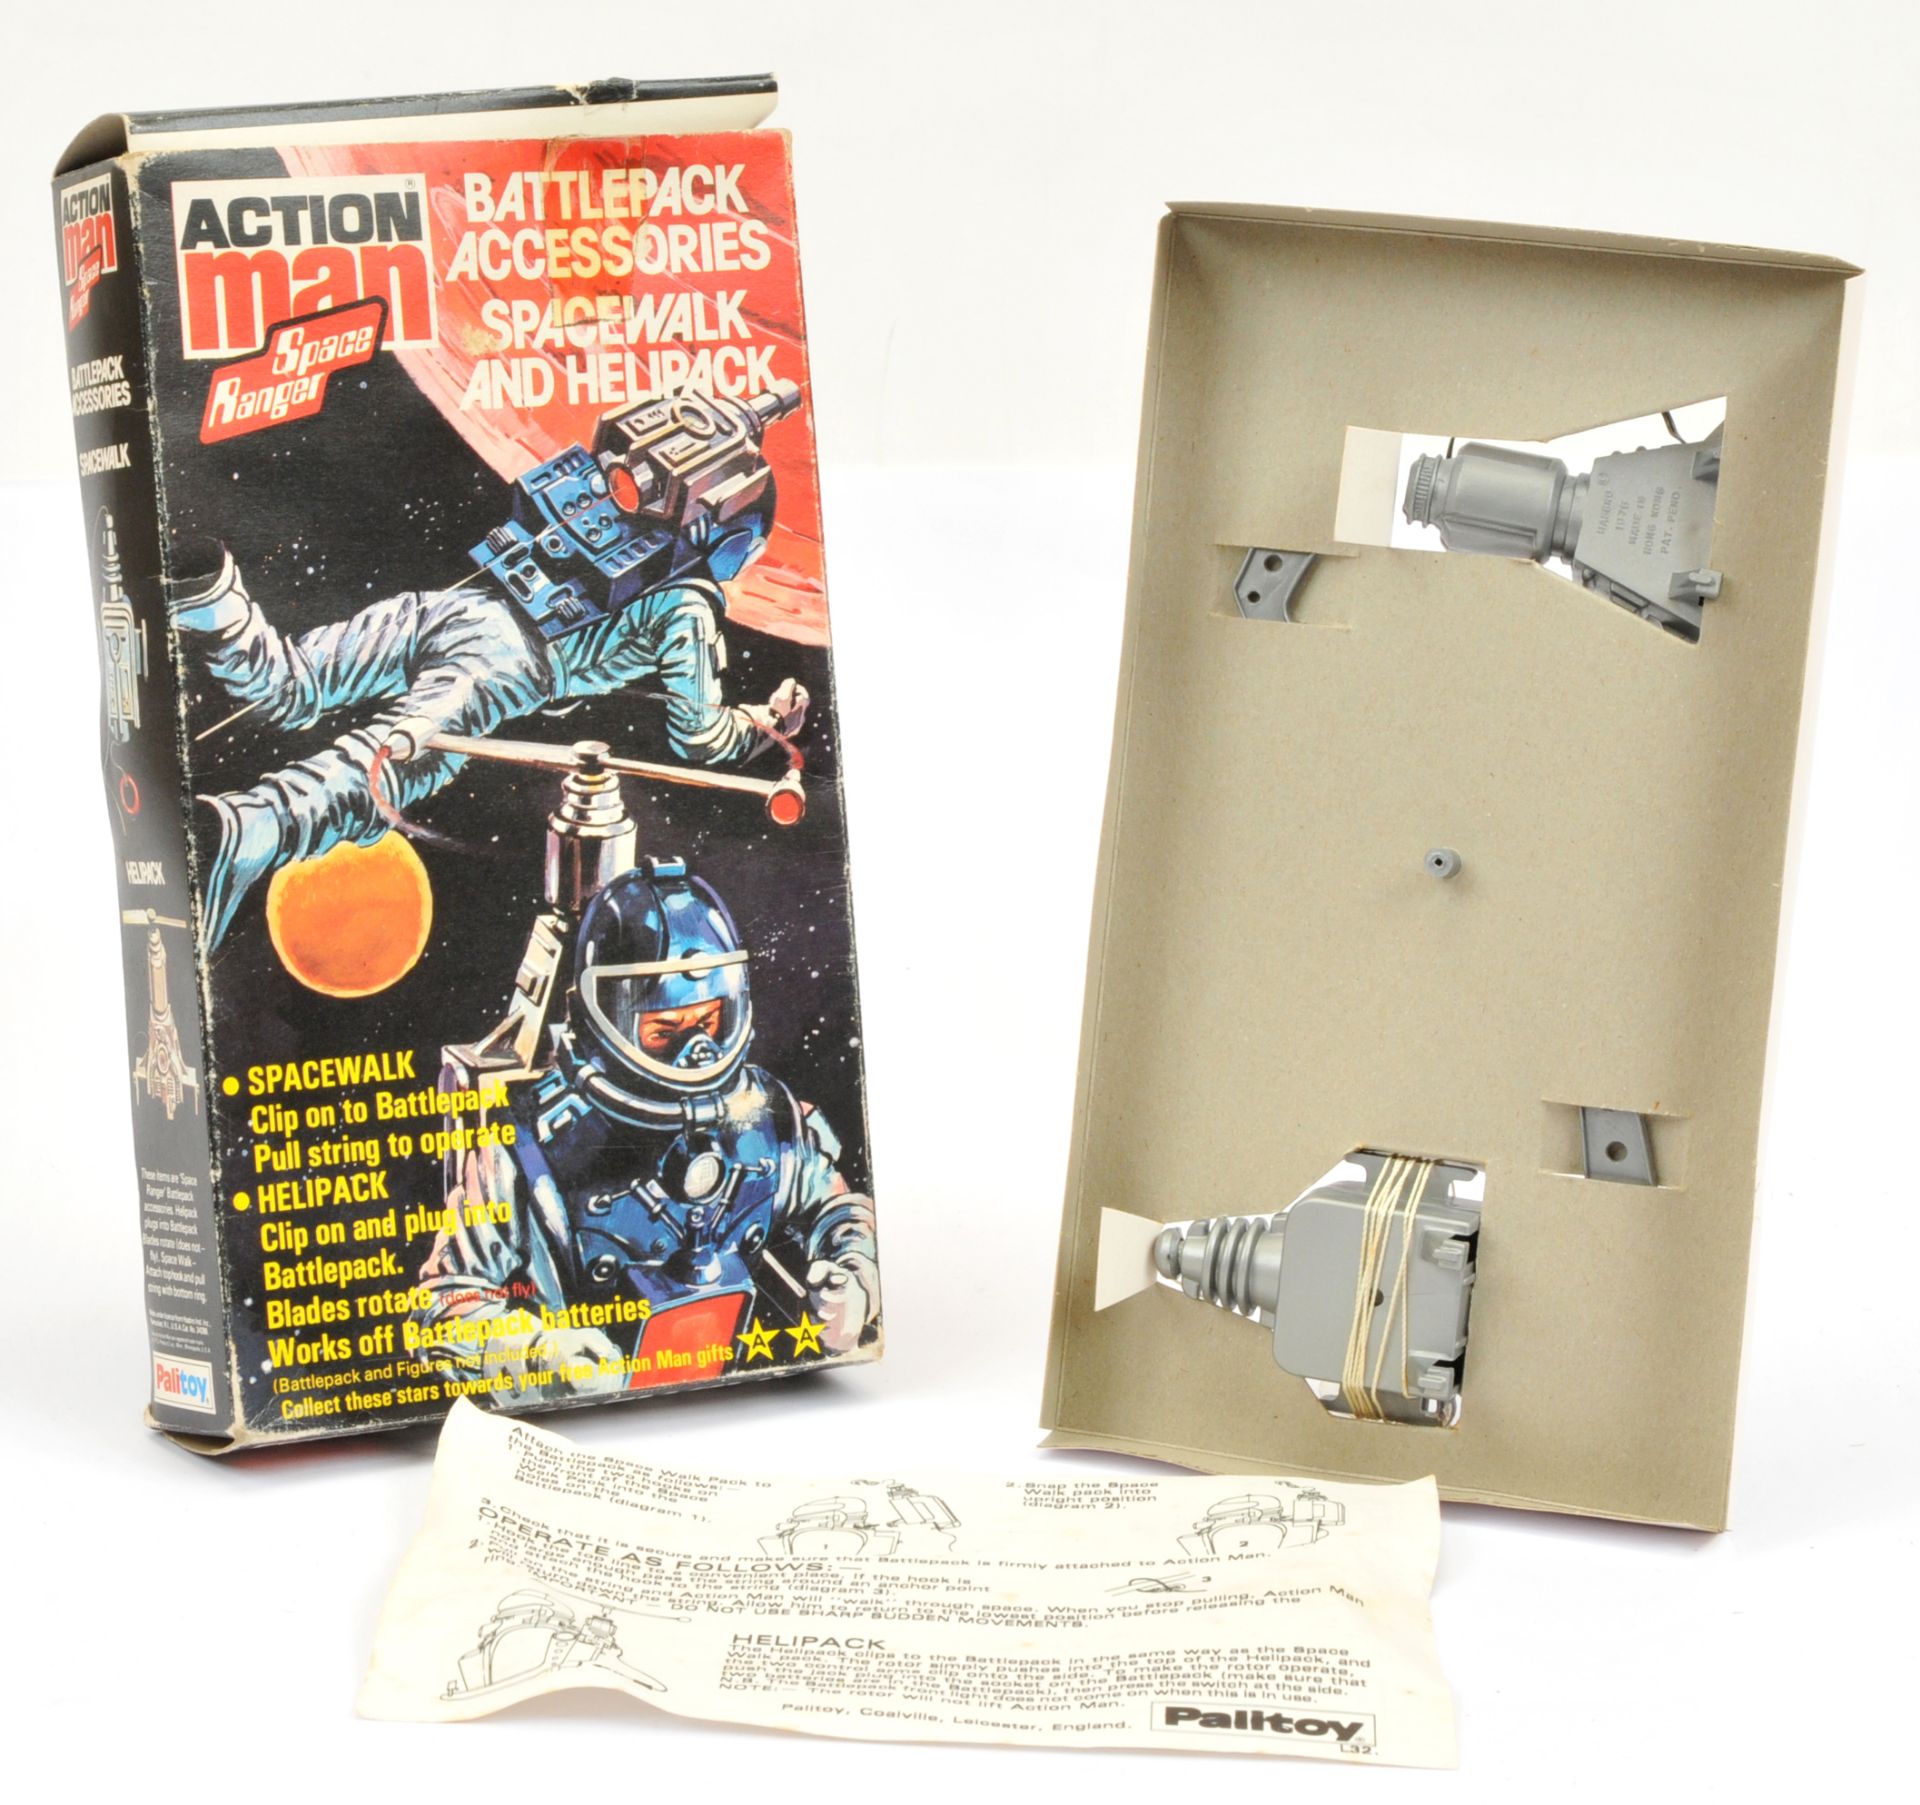 Palitoy Action Man vintage Battlepack Accessories Spacewalk and Helipack, within Fair (crushed) box. - Image 2 of 2